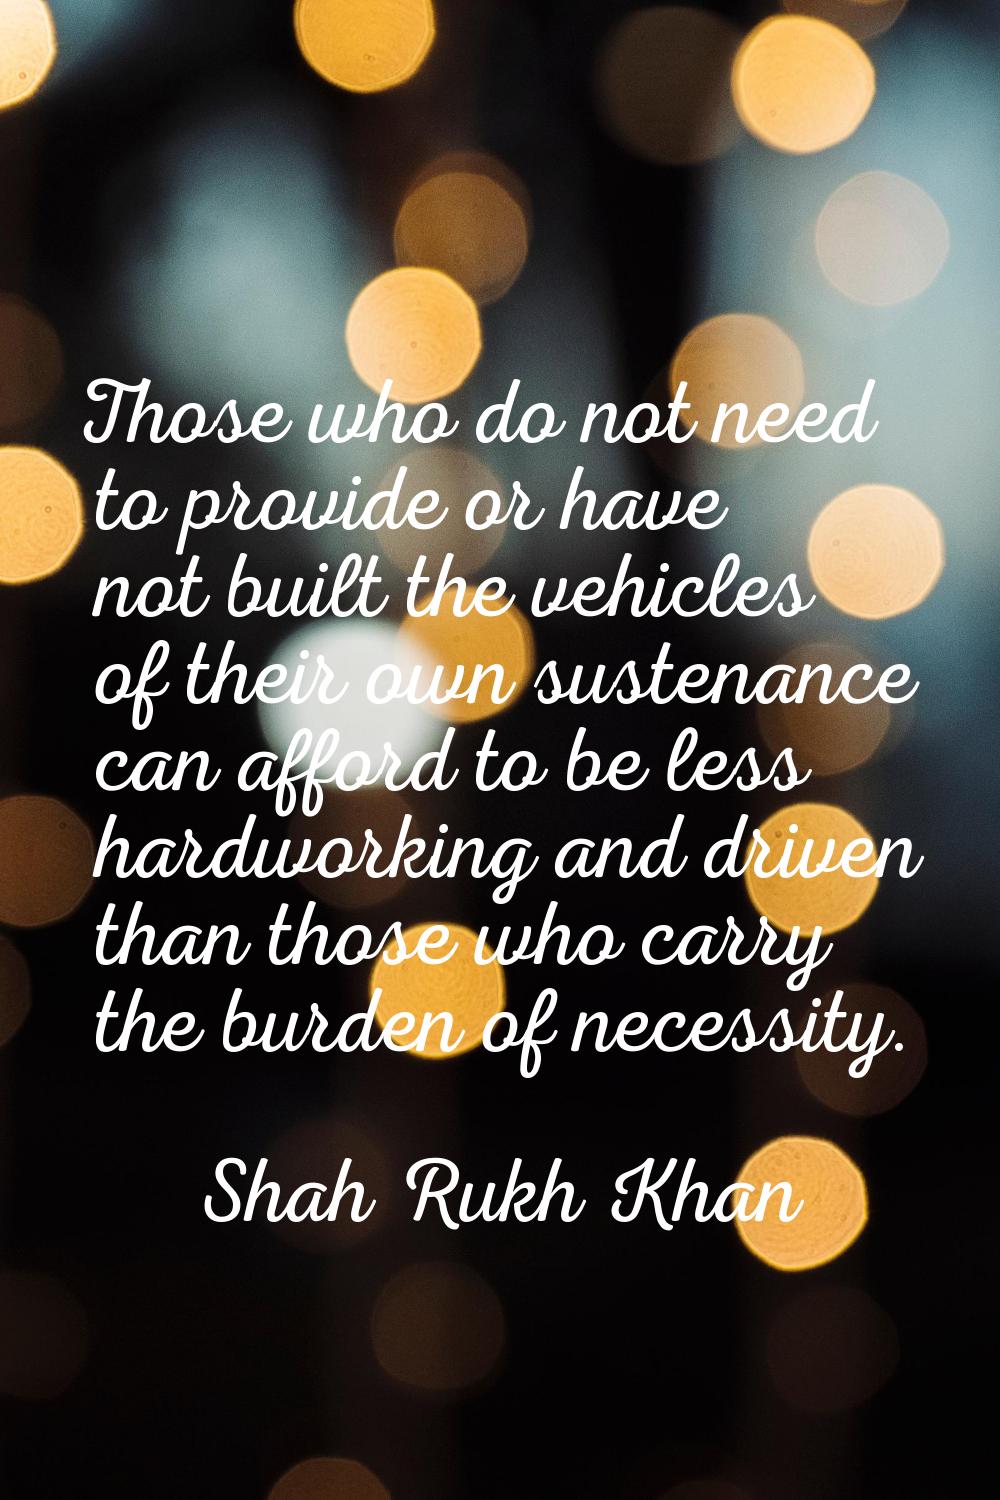 Those who do not need to provide or have not built the vehicles of their own sustenance can afford 